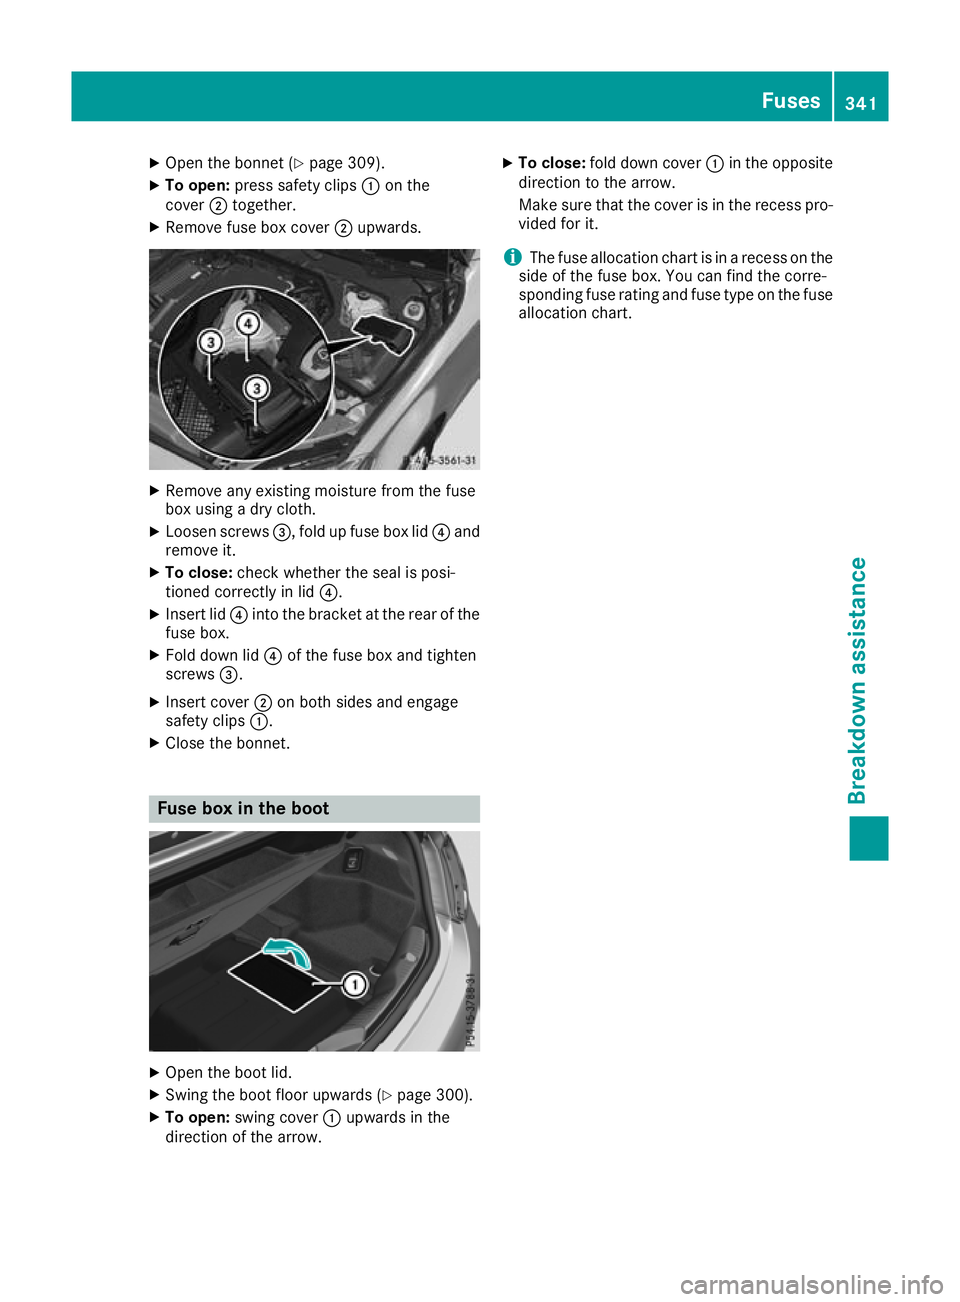 MERCEDES-BENZ C-CLASS CABRIOLET 2016  Owners Manual X
Open the bonnet (Y page 309).
X To open: press safety clips :on the
cover ;together.
X Remove fuse box cover ;upwards. X
Remove any existing moisture from the fuse
box using a dry cloth.
X Loosen sc